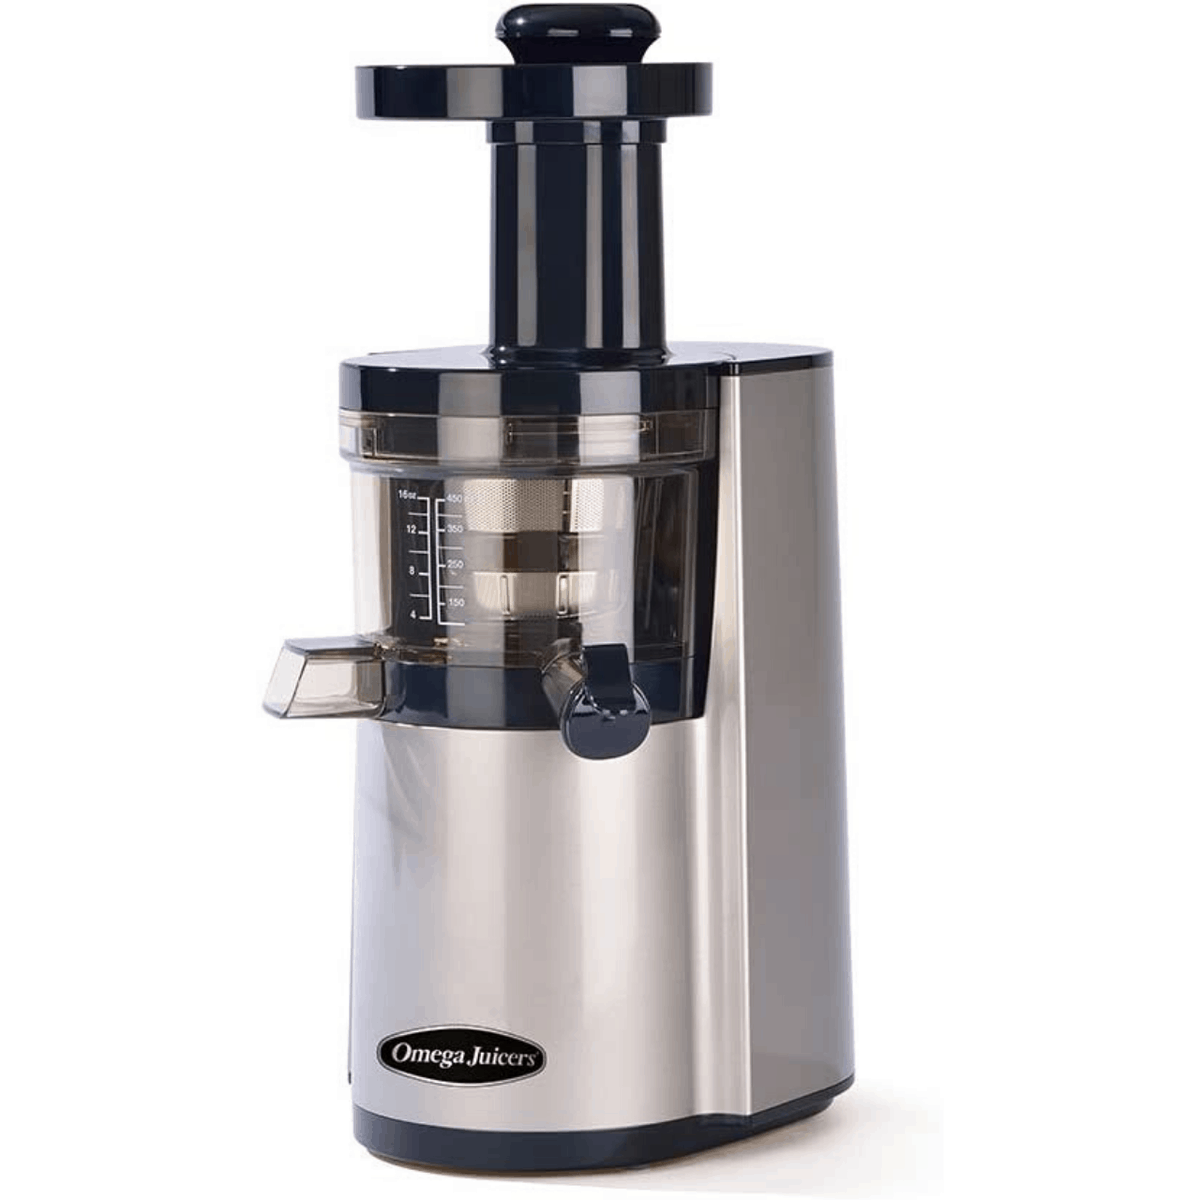 Product - Juicer